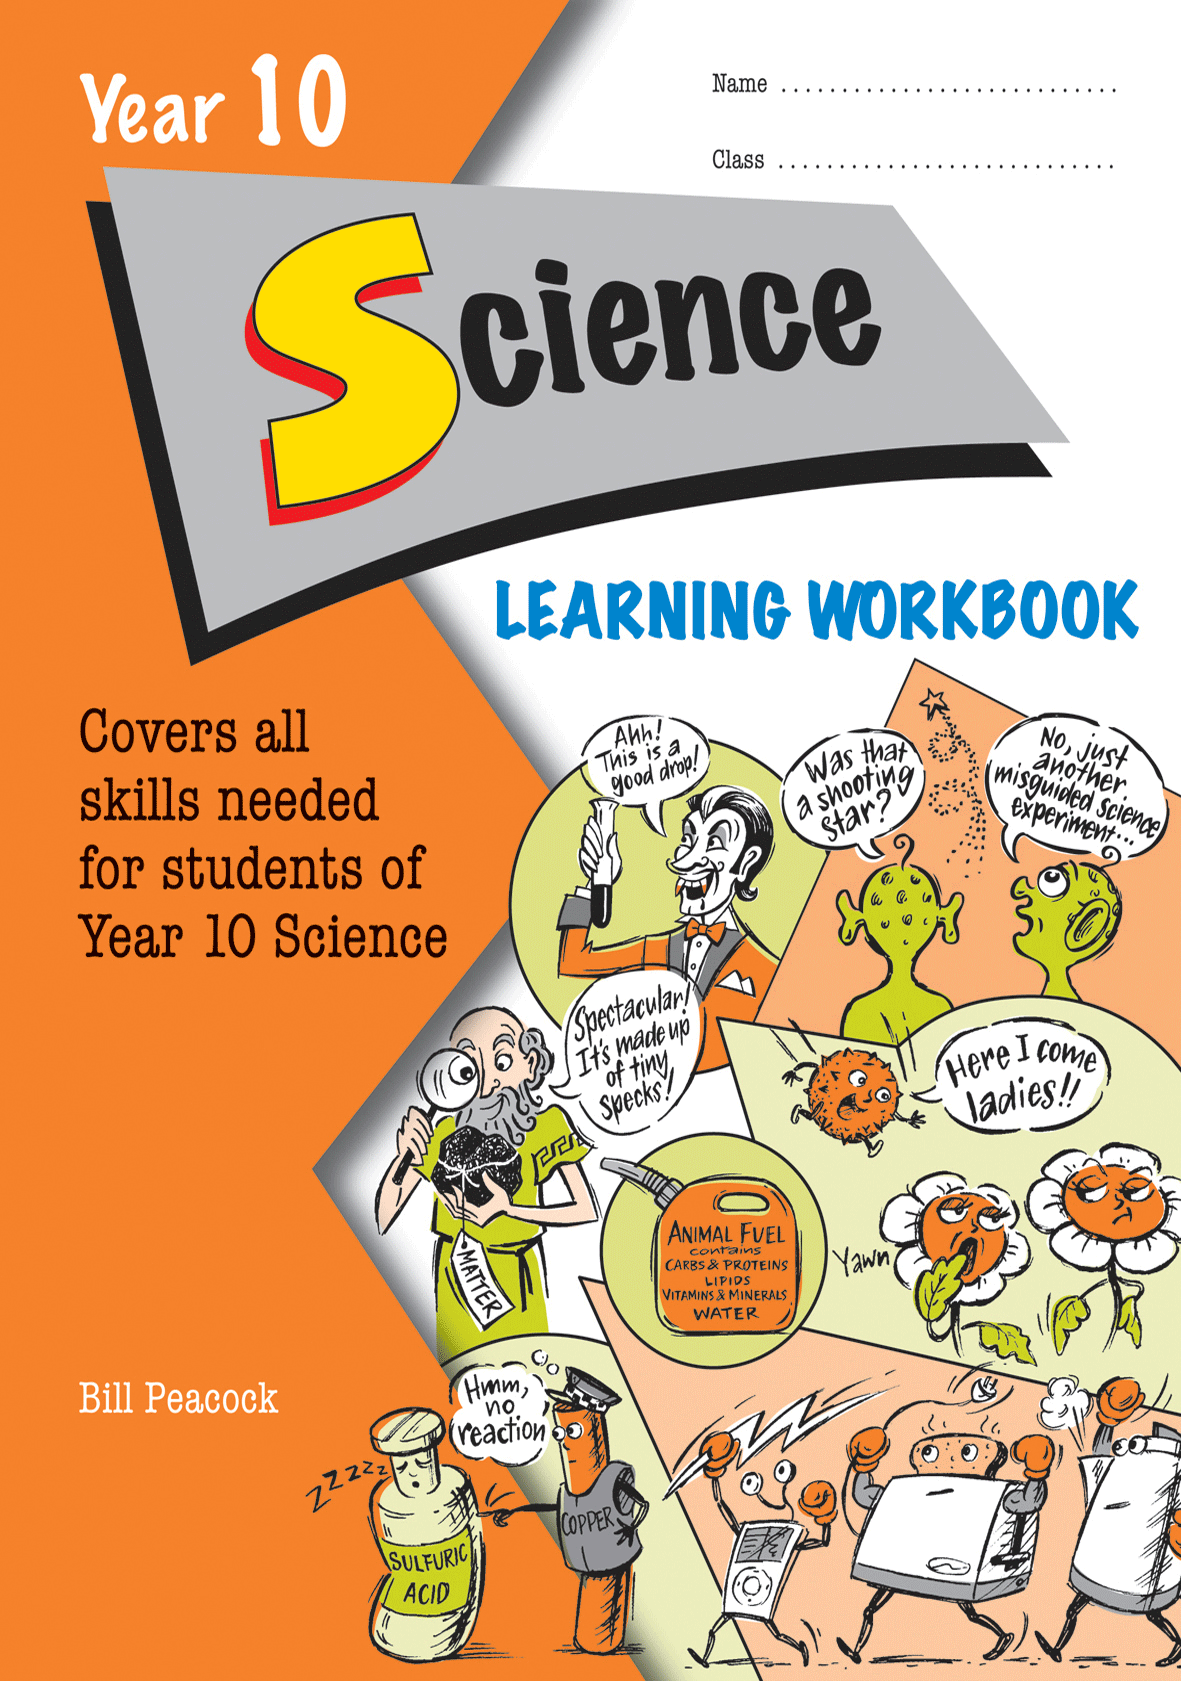 Year 10 Science Learning Workbook